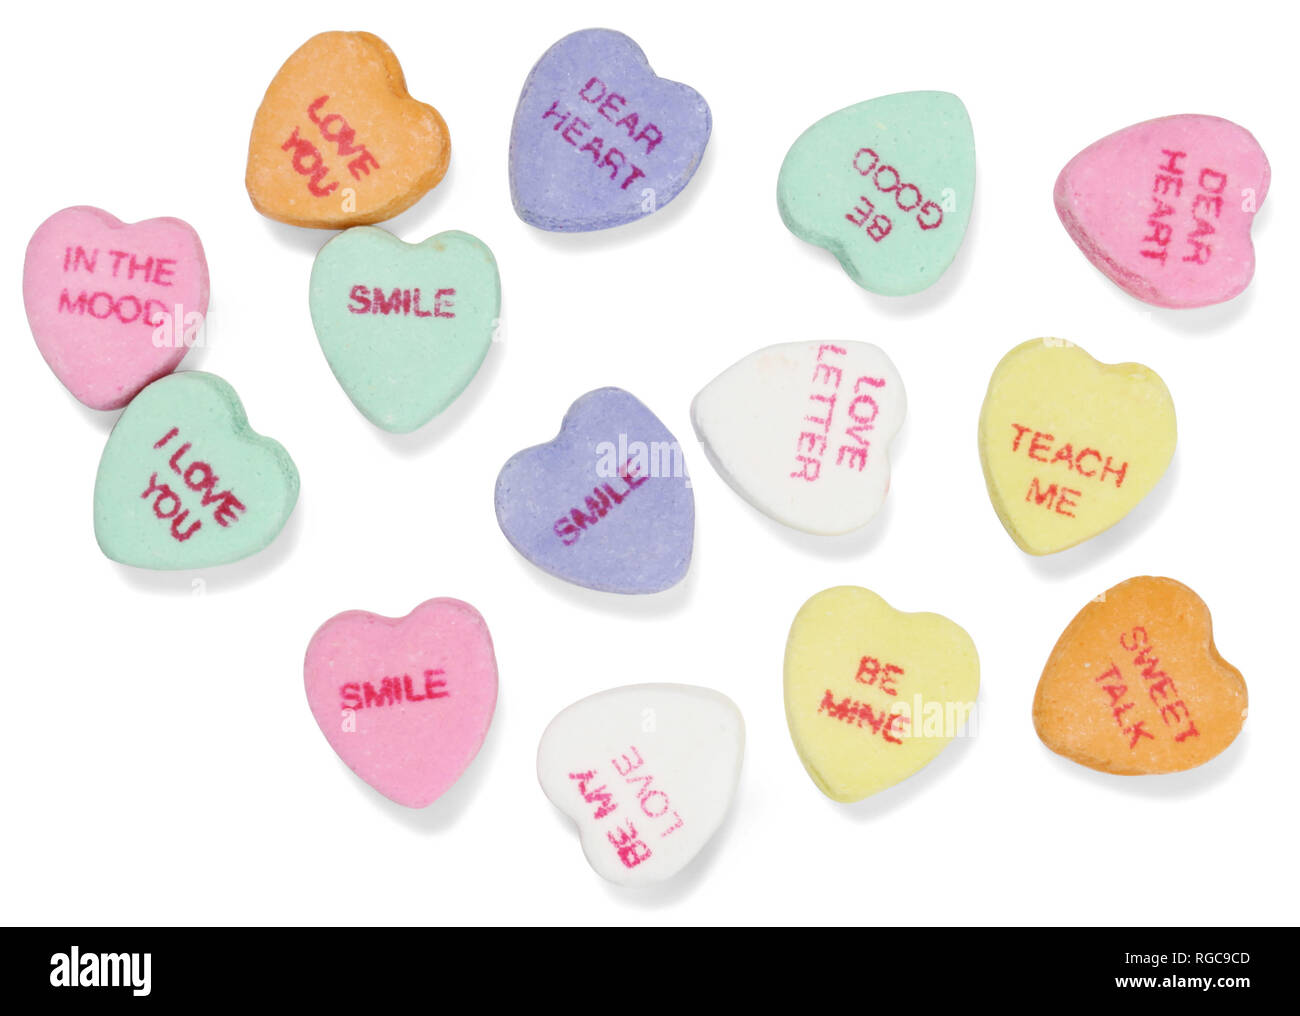 28+ Thousand Conversation Hearts Royalty-Free Images, Stock Photos